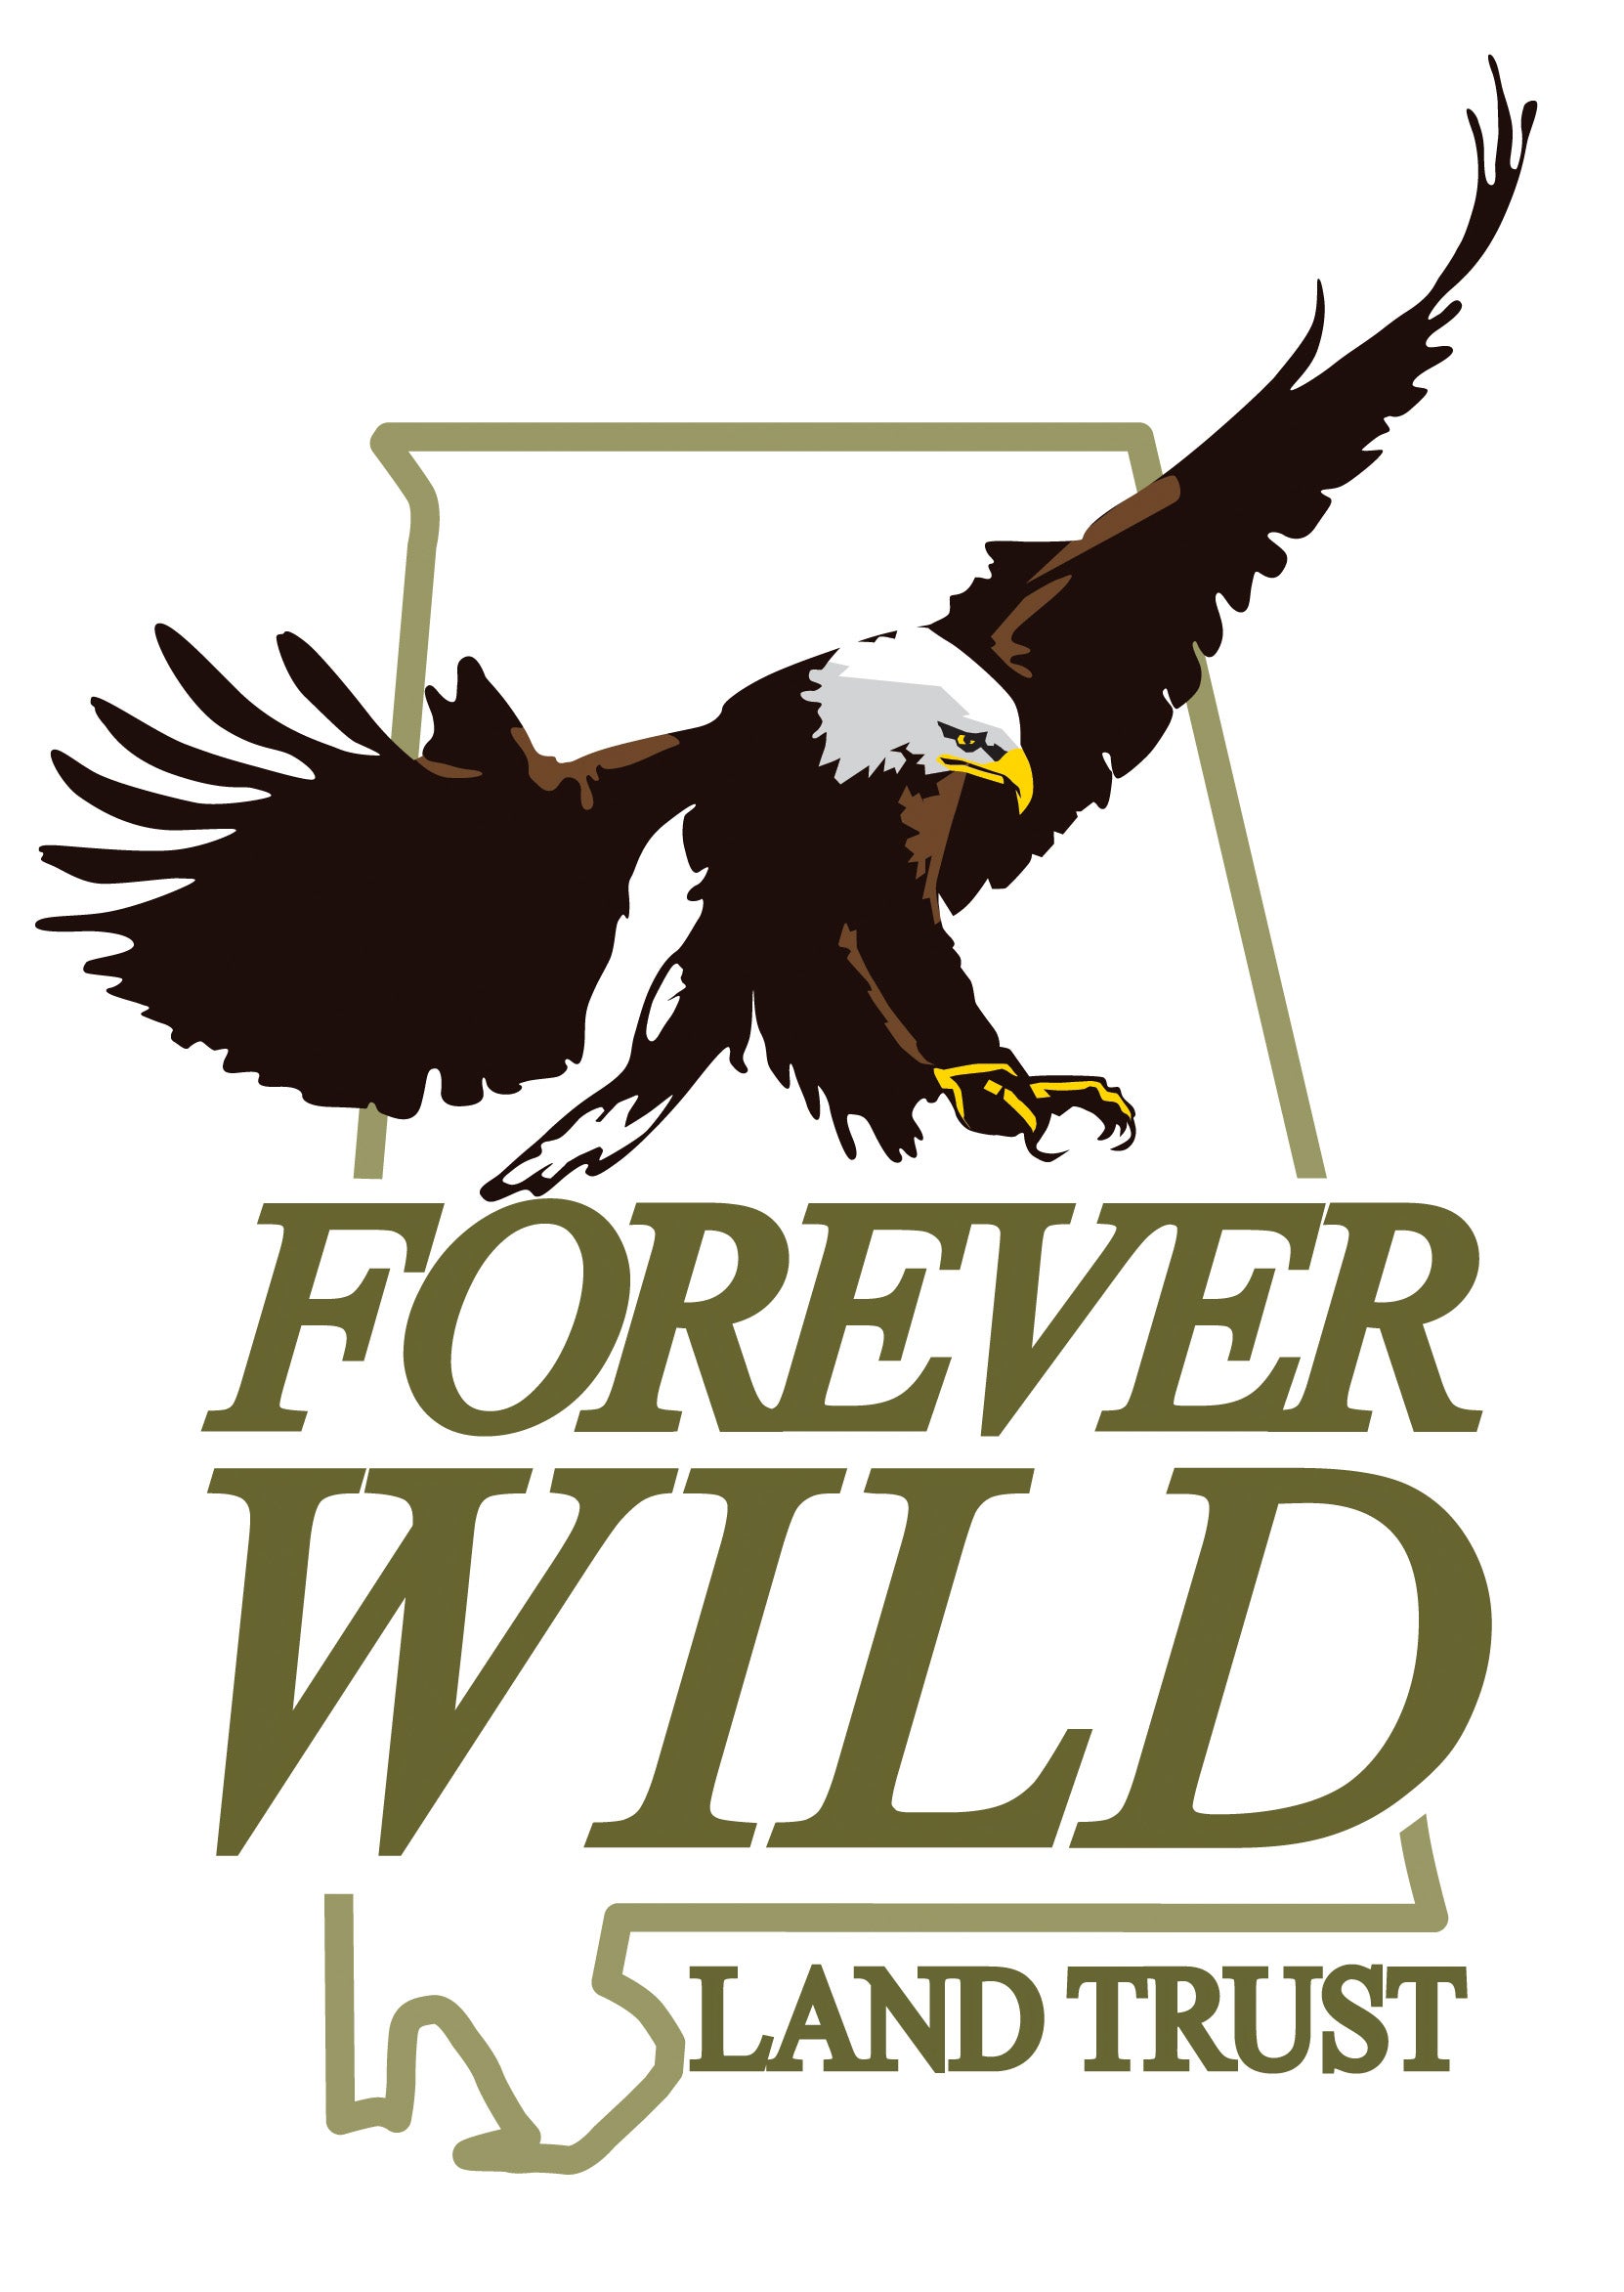 Forever Wild Board Meets in Montgomery on February 2